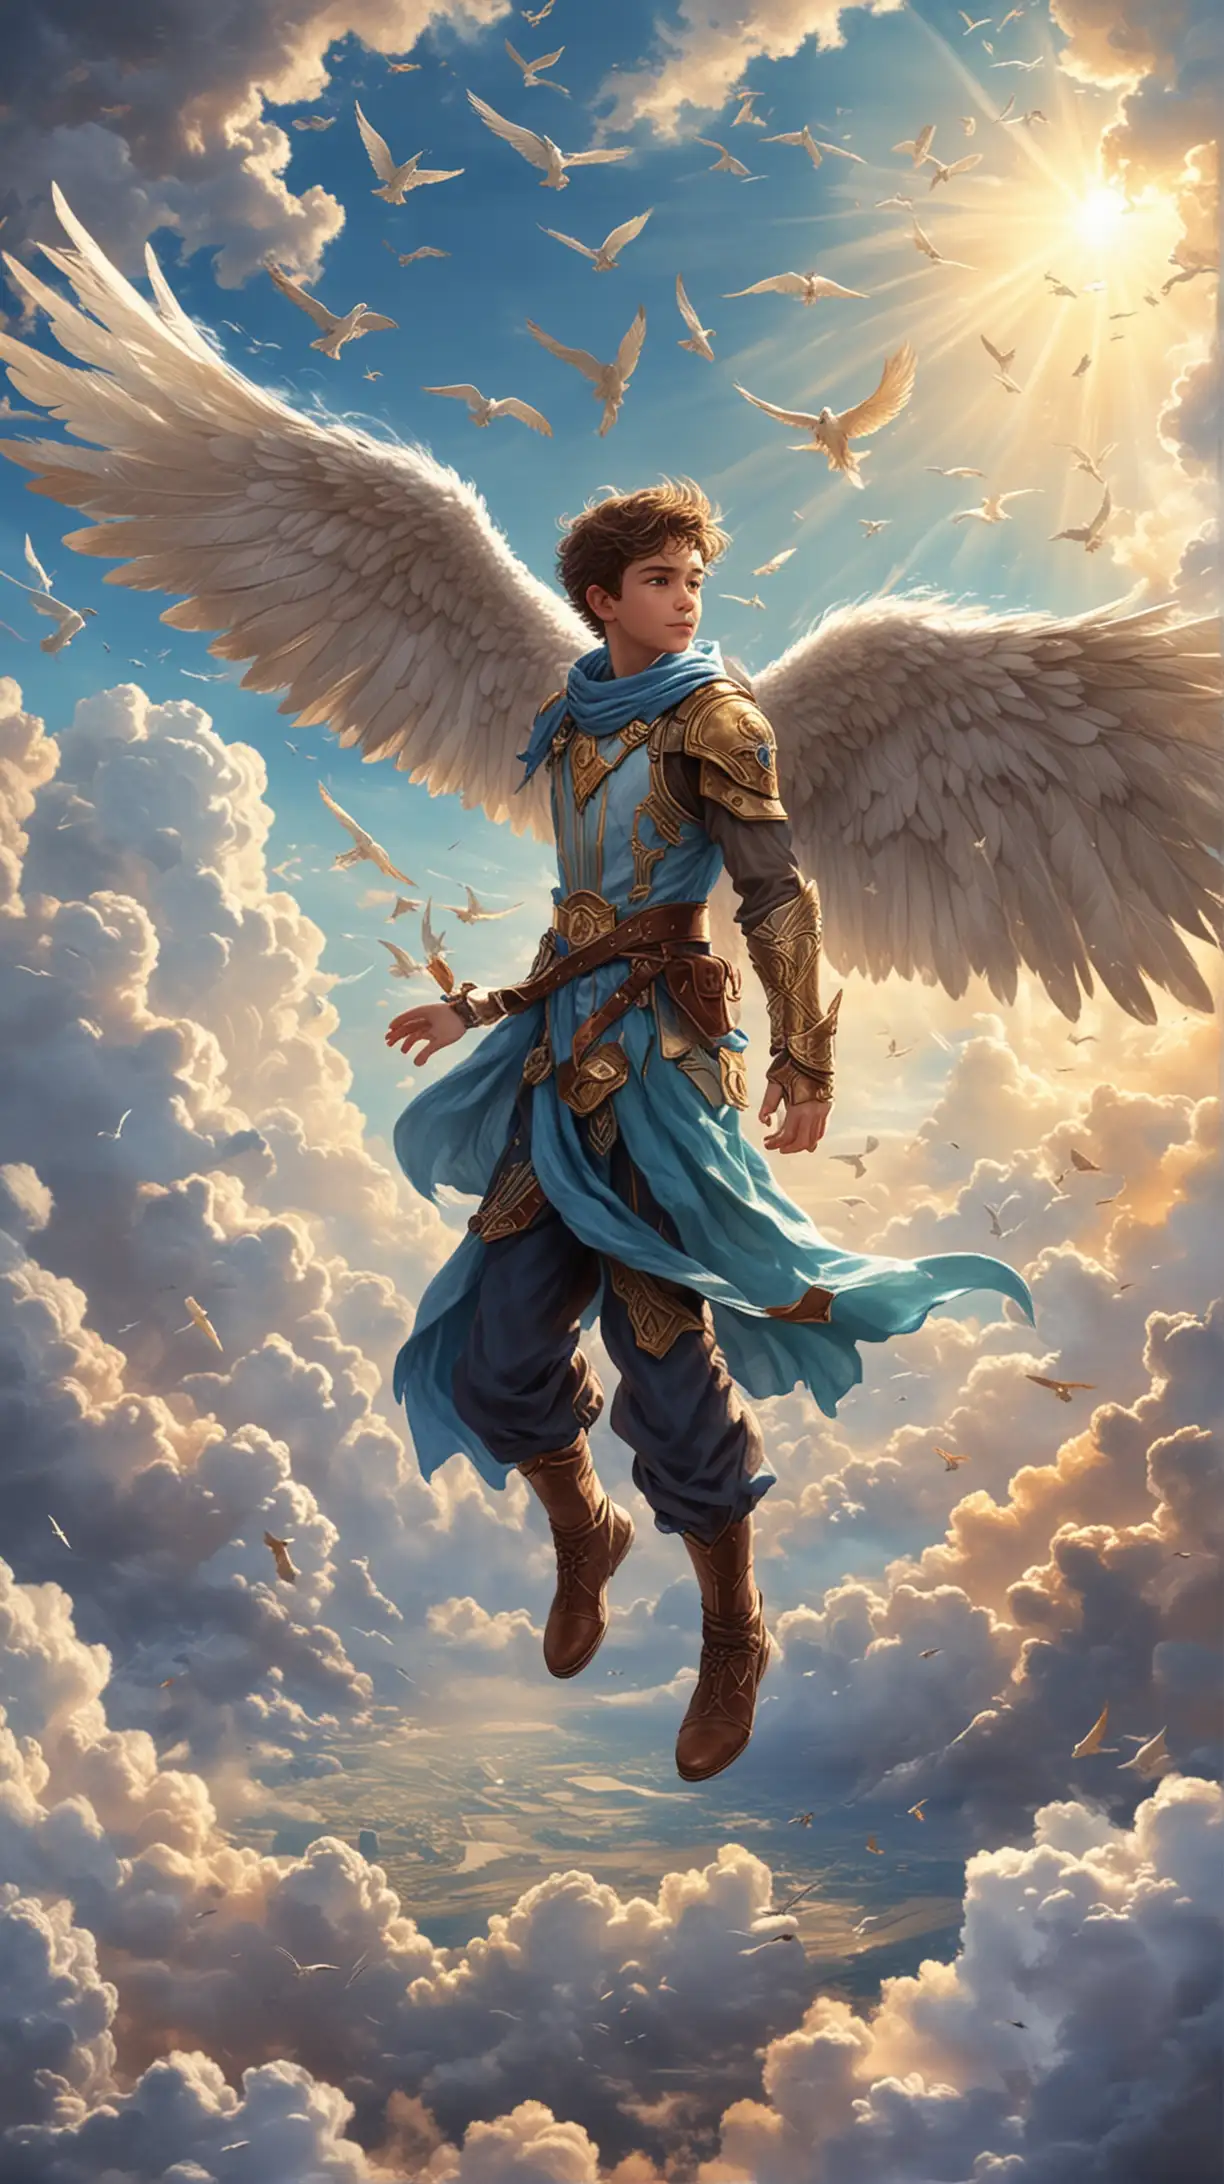  Aiden vowed to use his gift for the greater good. He became known as the "Sky Guardian," soaring through the skies by day, spreading hope and inspiration to all who beheld his graceful flights.